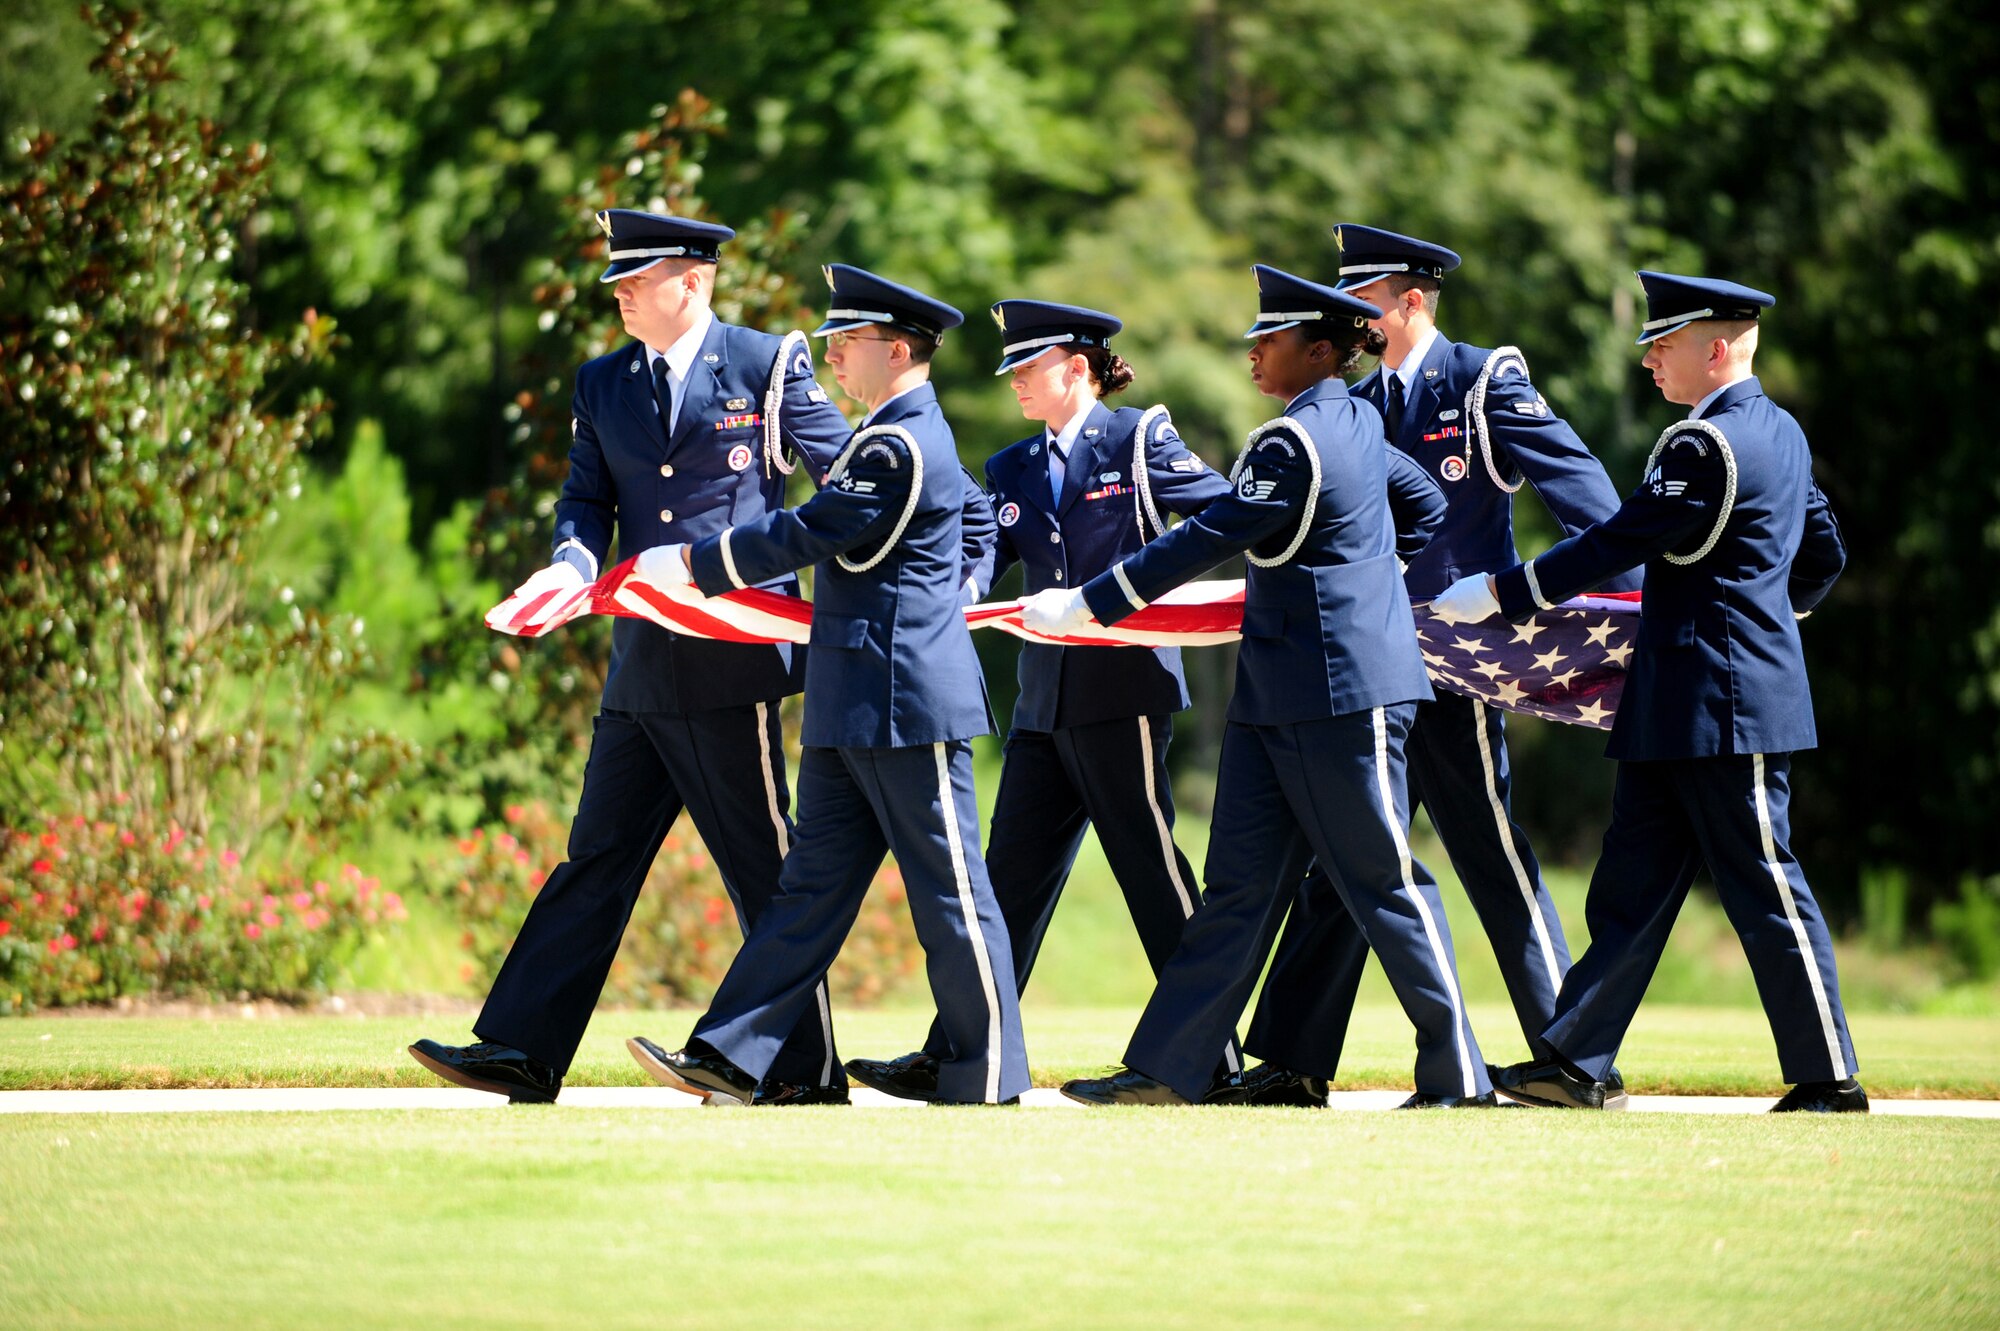 Members of the Maxwell Air Force Base Honor Guard perform a memorial ceremony held Aug. 22, 2012 at the Alabama National Cemetary in Montevallo Ala. Although Mr. was U.S. Naval veteran, Honor Guard Airmen participate in joint service funerals around the globe. (U.S. Air Force photo by Master Sgt. Michael Voss) 